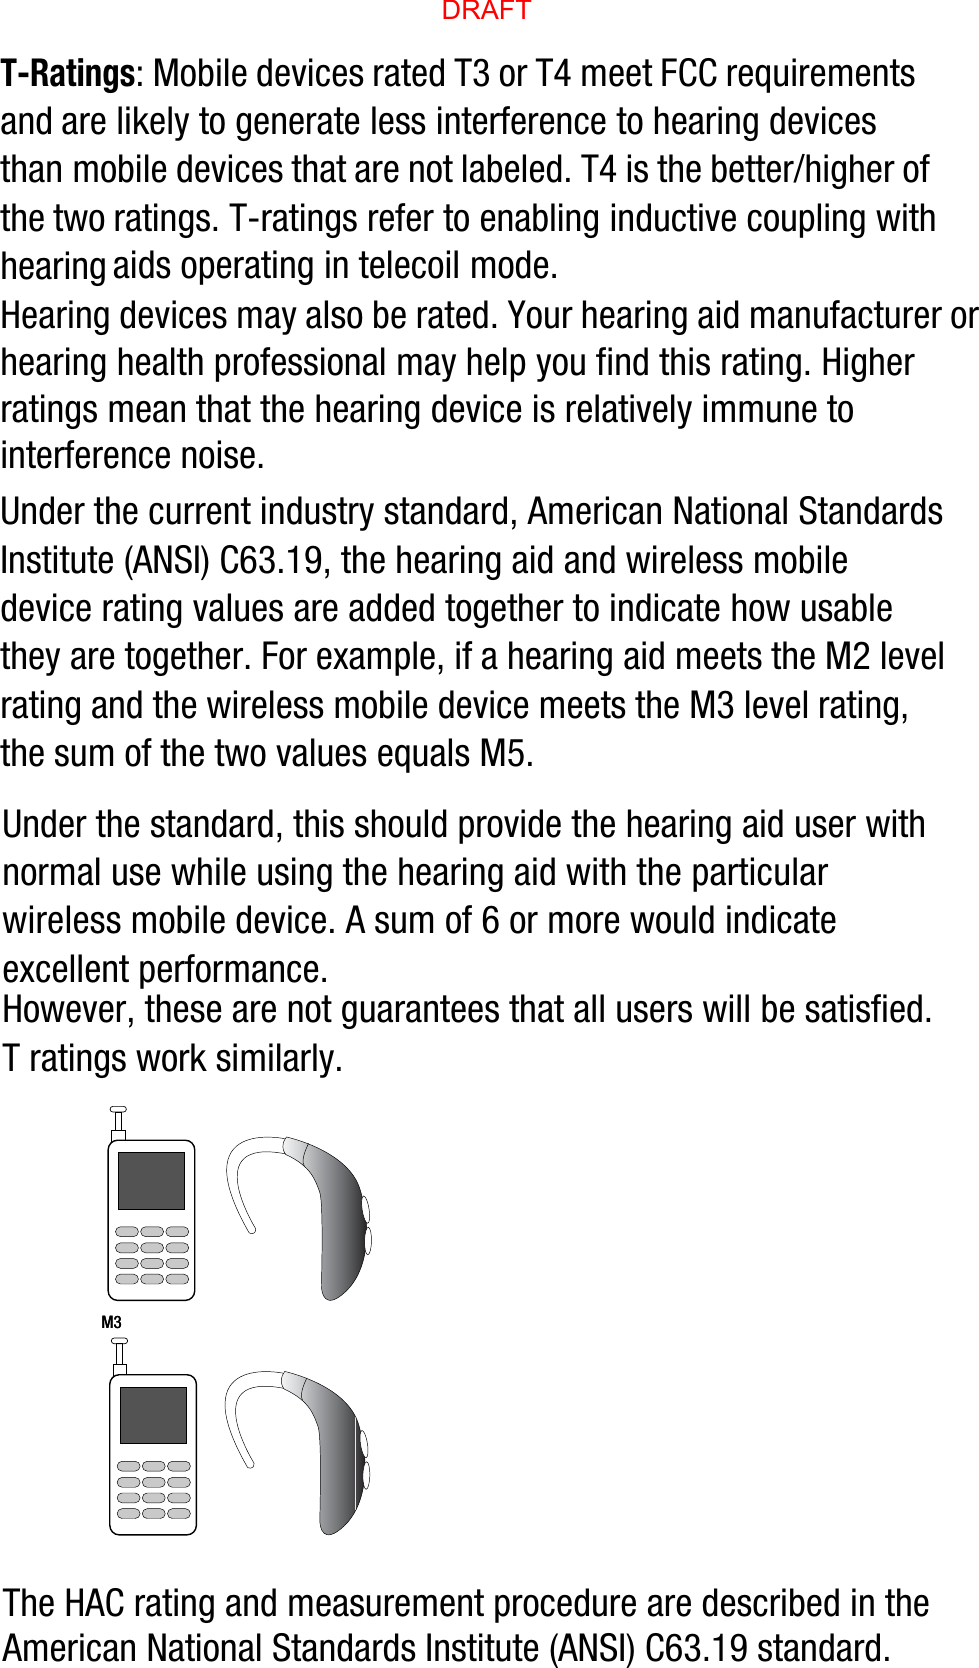 T-Ratings: Mobile devices rated T3 or T4 meet FCC requirements and are likely to generate less interference to hearing devices than mobile devices that are not labeled. T4 is the better/higher of the two ratings. T-ratings refer to enabling inductive coupling with hearing aids operating in telecoil mode.Hearing devices may also be rated. Your hearing aid manufacturer or hearing health professional may help you find this rating. Higher ratings mean that the hearing device is relatively immune to interference noise. Under the current industry standard, American National Standards Institute (ANSI) C63.19, the hearing aid and wireless mobile device rating values are added together to indicate how usable they are together. For example, if a hearing aid meets the M2 level rating and the wireless mobile device meets the M3 level rating, the sum of the two values equals M5. Under the standard, this should provide the hearing aid user with normal use while using the hearing aid with the particular wireless mobile device. A sum of 6 or more would indicate excellent performance.  However, these are not guarantees that all users will be satisfied. T ratings work similarly.The HAC rating and measurement procedure are described in the American National Standards Institute (ANSI) C63.19 standard.    M3       M3        DRAFT